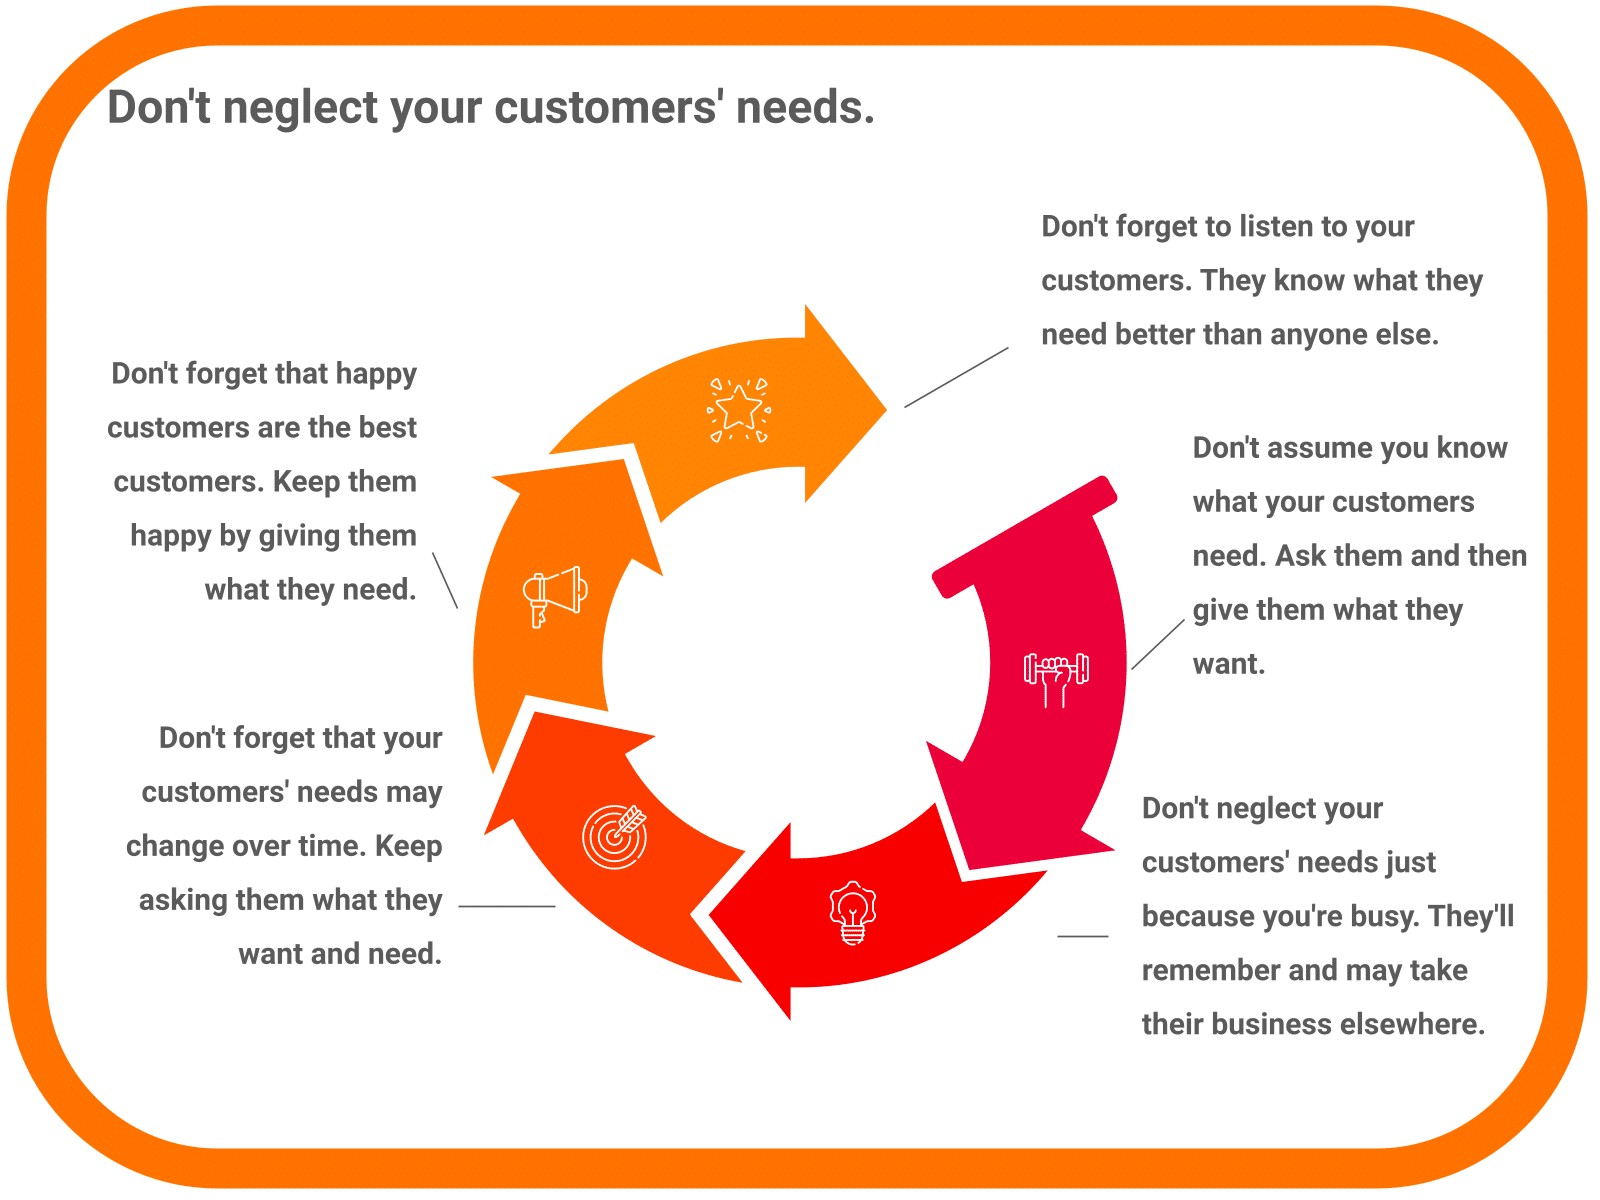 Don’t neglect your customers’ needs.